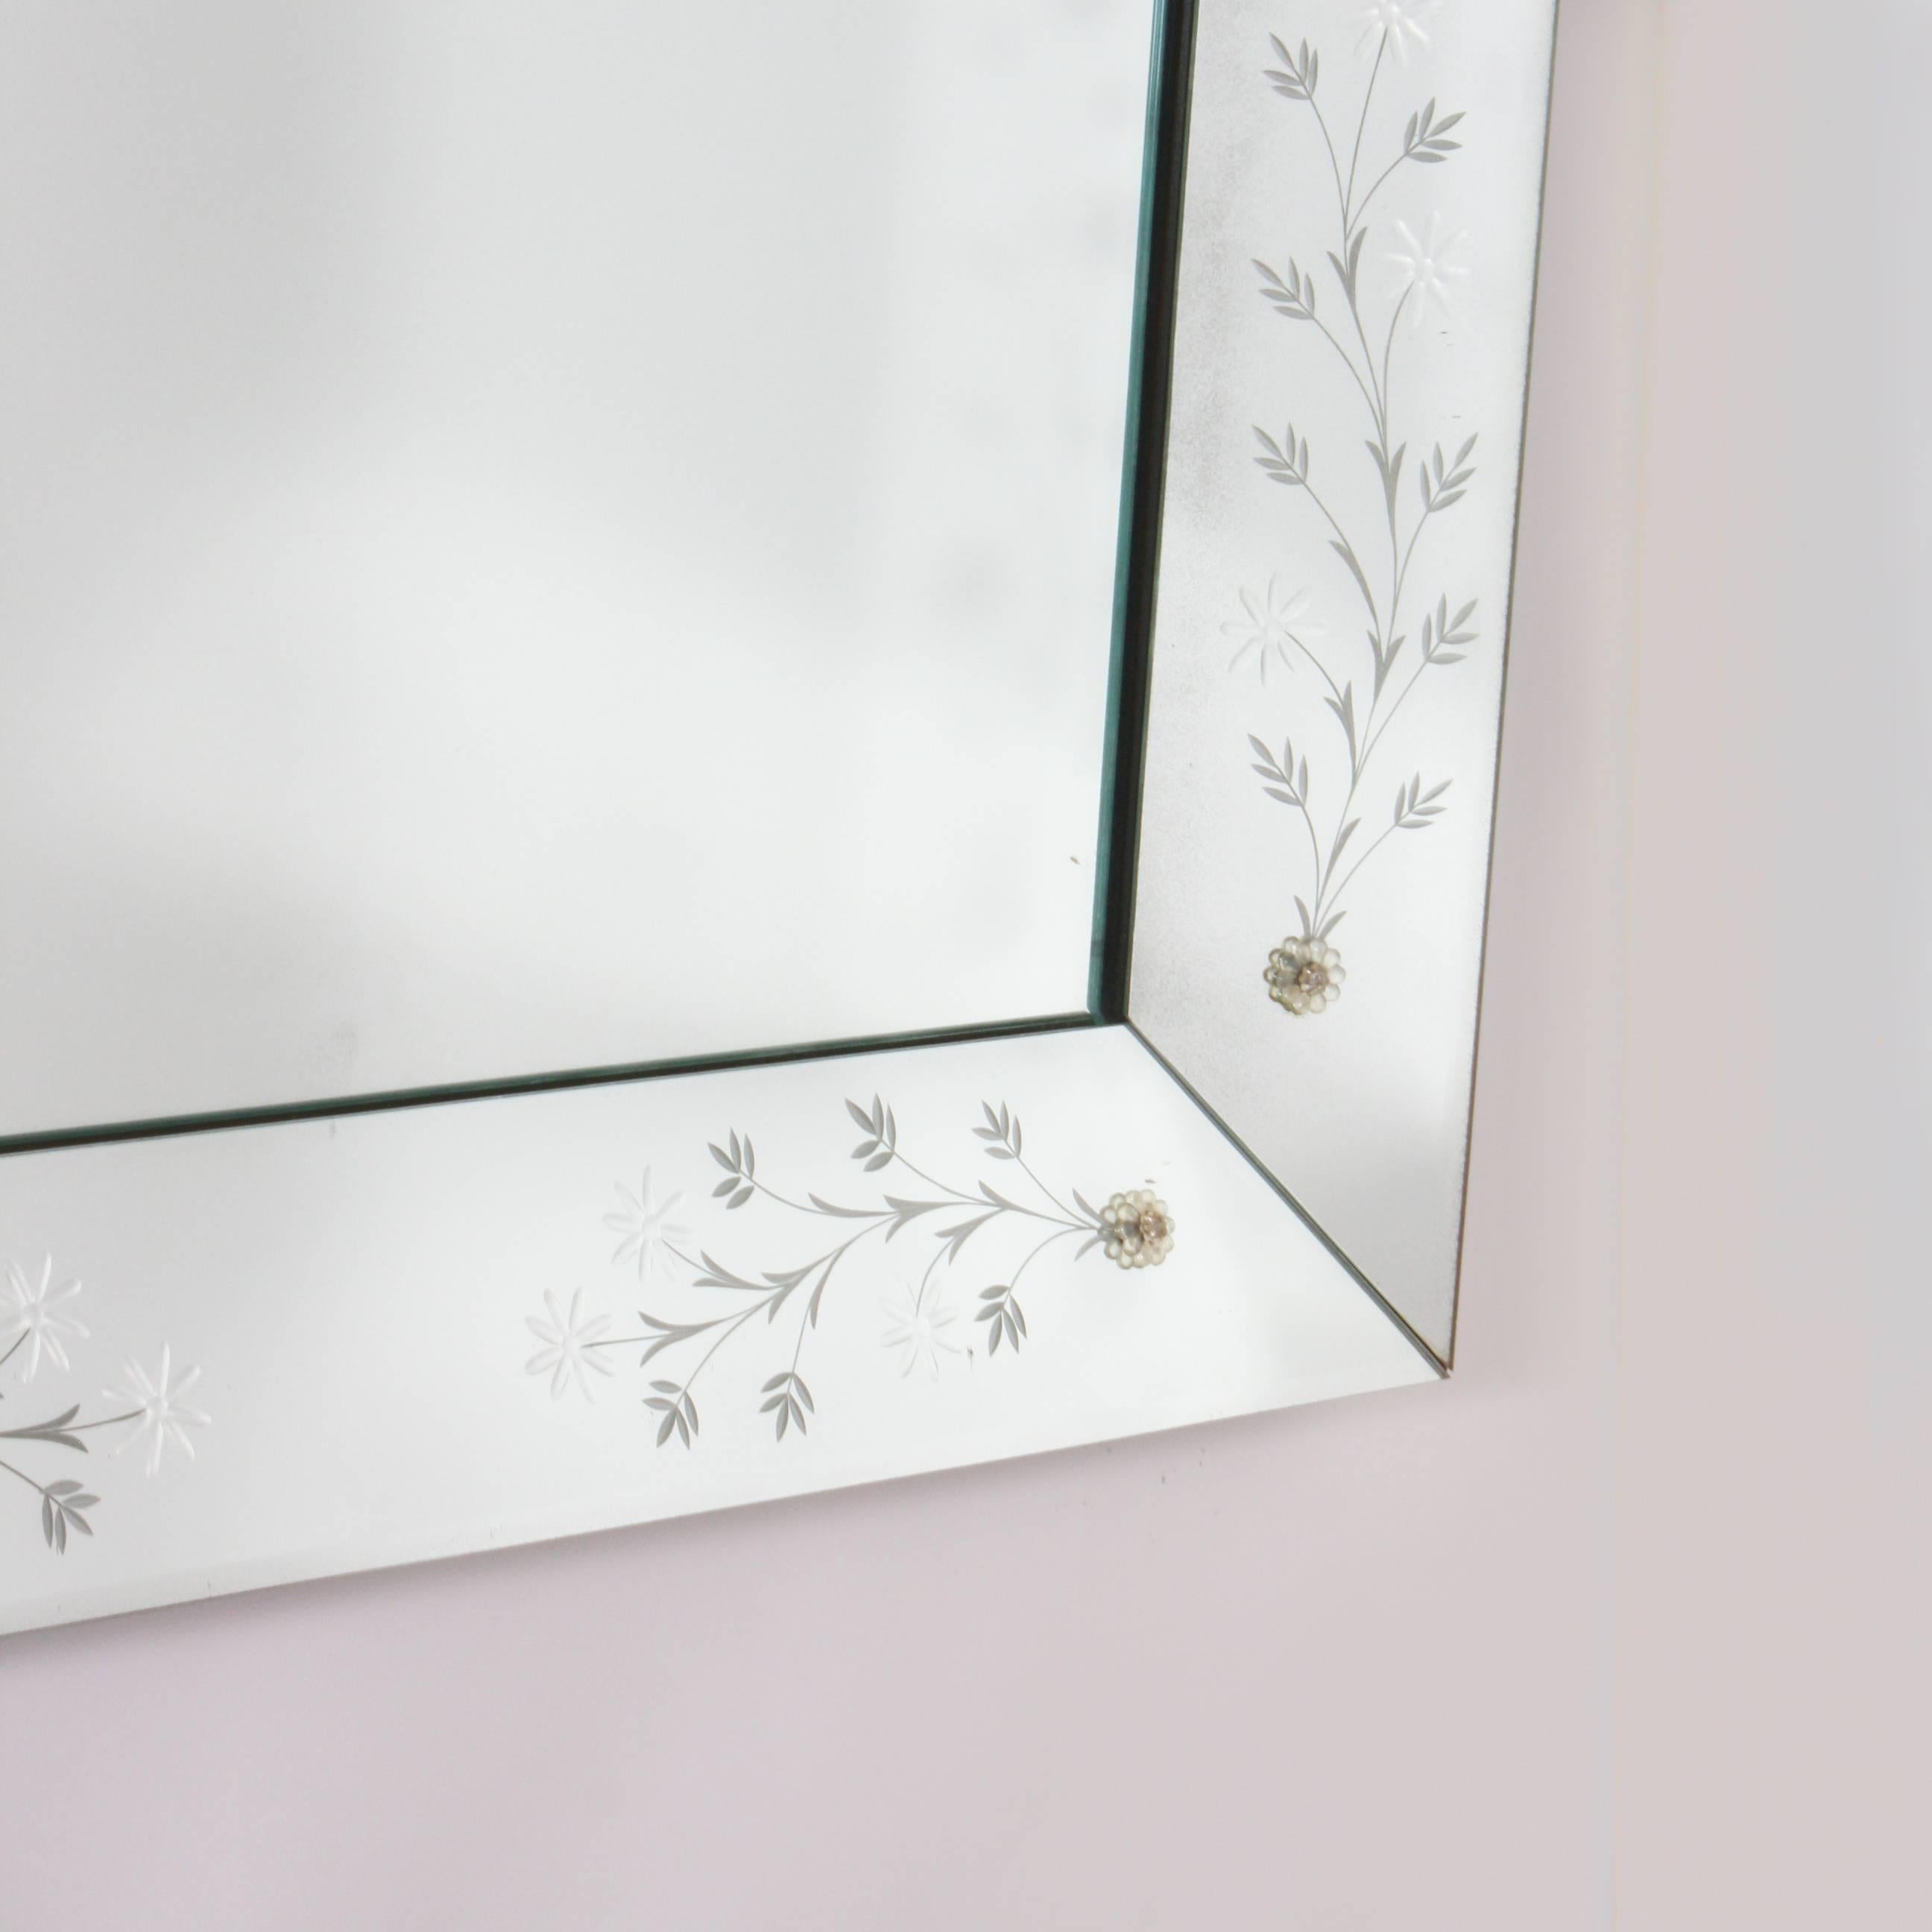 Large mirror frame mirror with flower etching and rosettes.